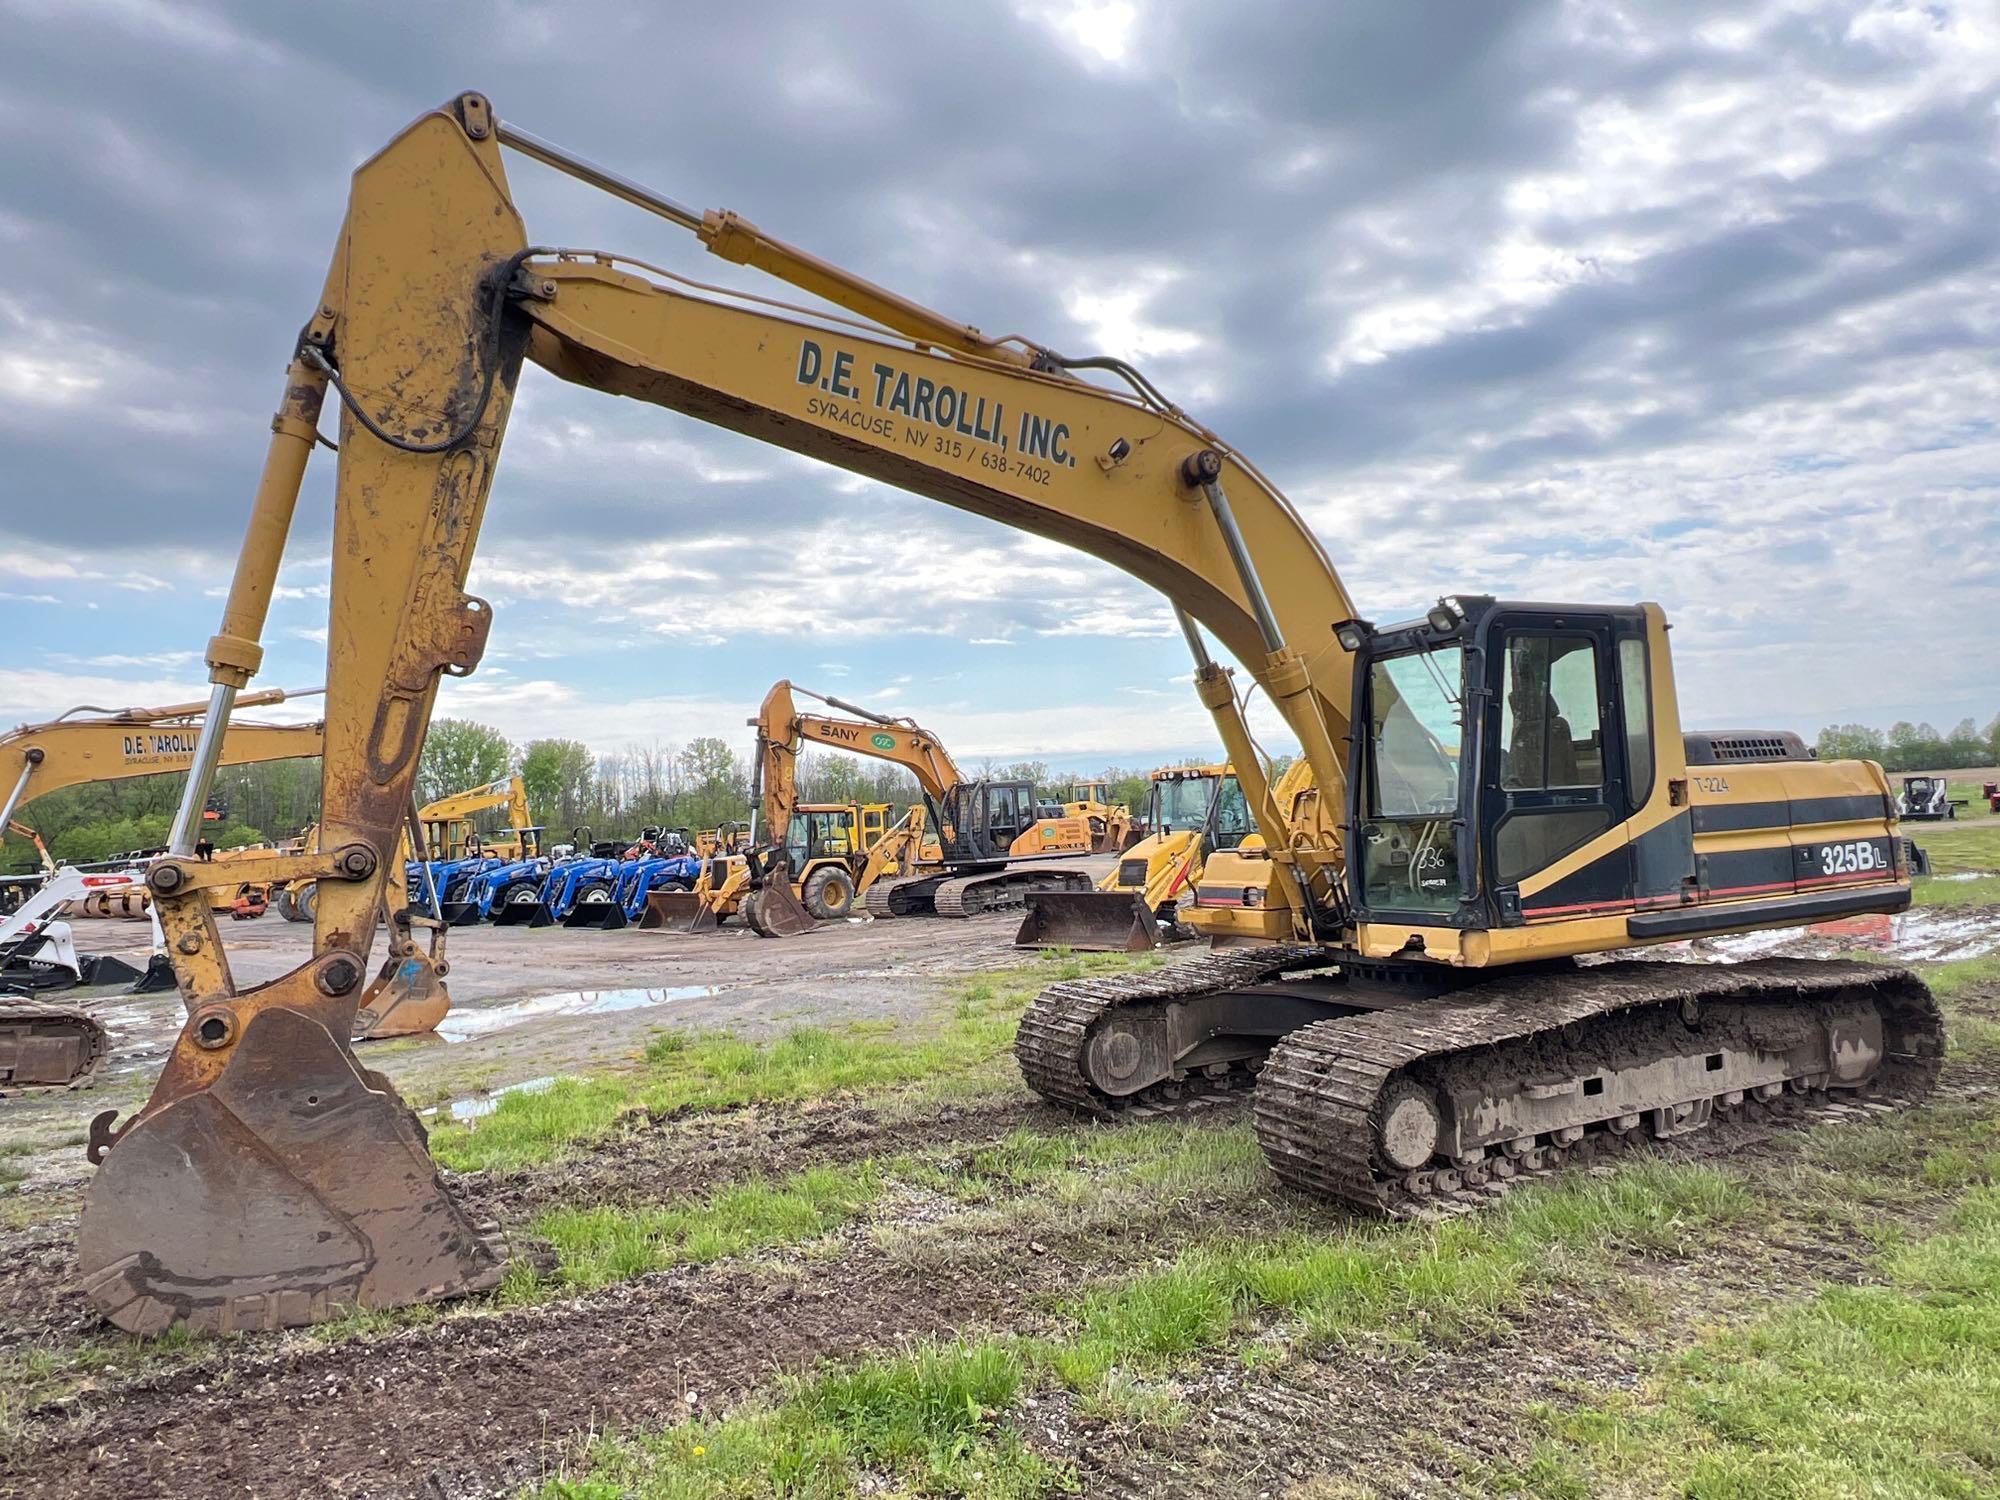 CAT 325BL HYDRAULIC EXCAVATOR SN:2JR00539 powered by Cat 3116TA diesel engine, equipped with Cab,